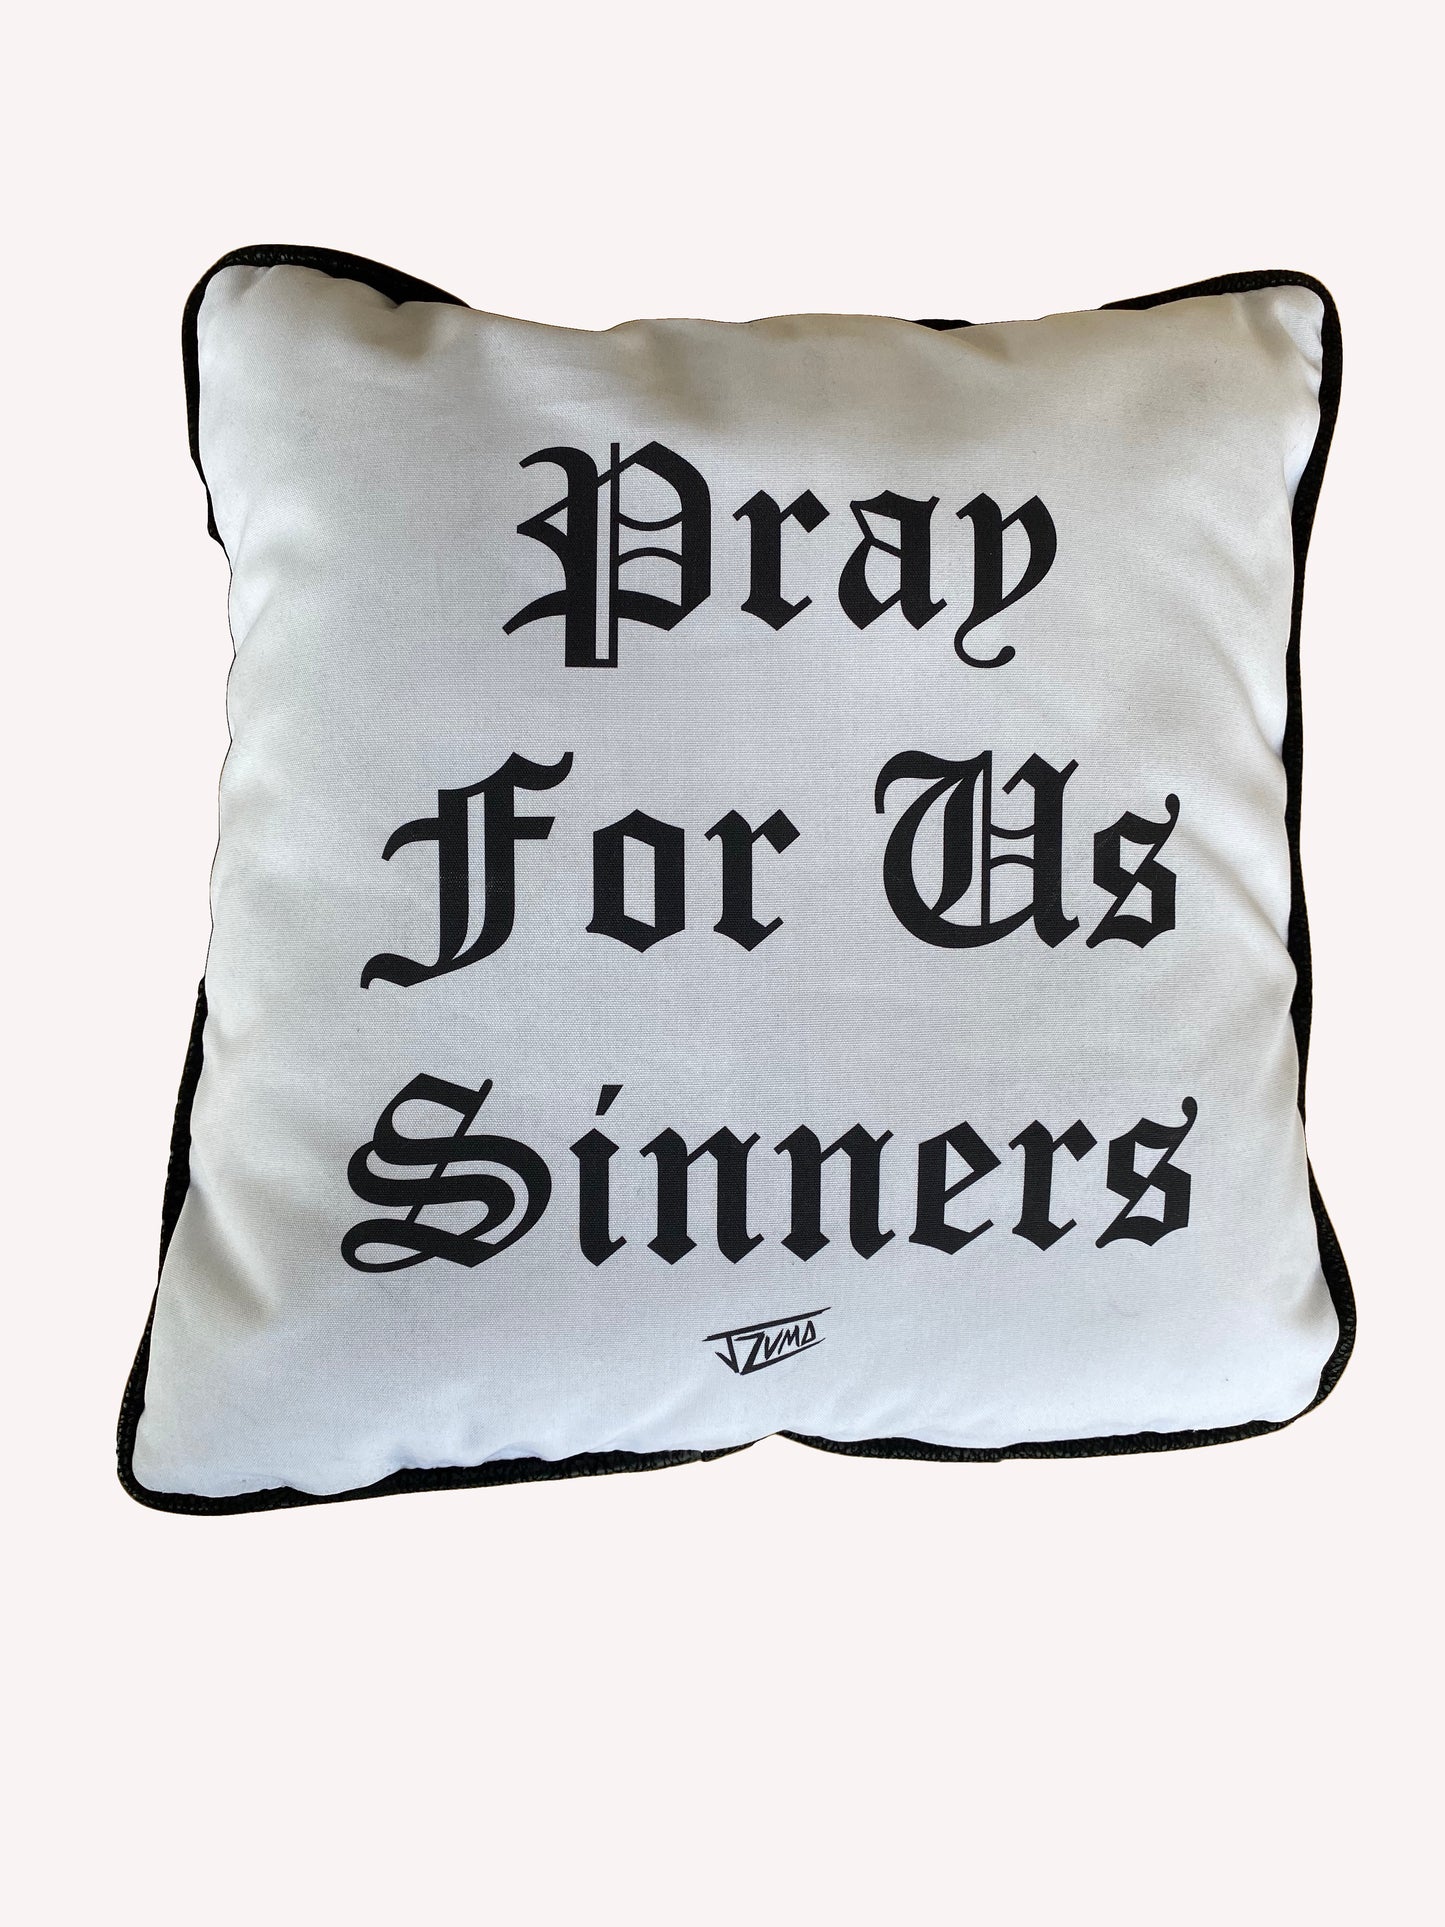 Pray For Us Sinners Pillows